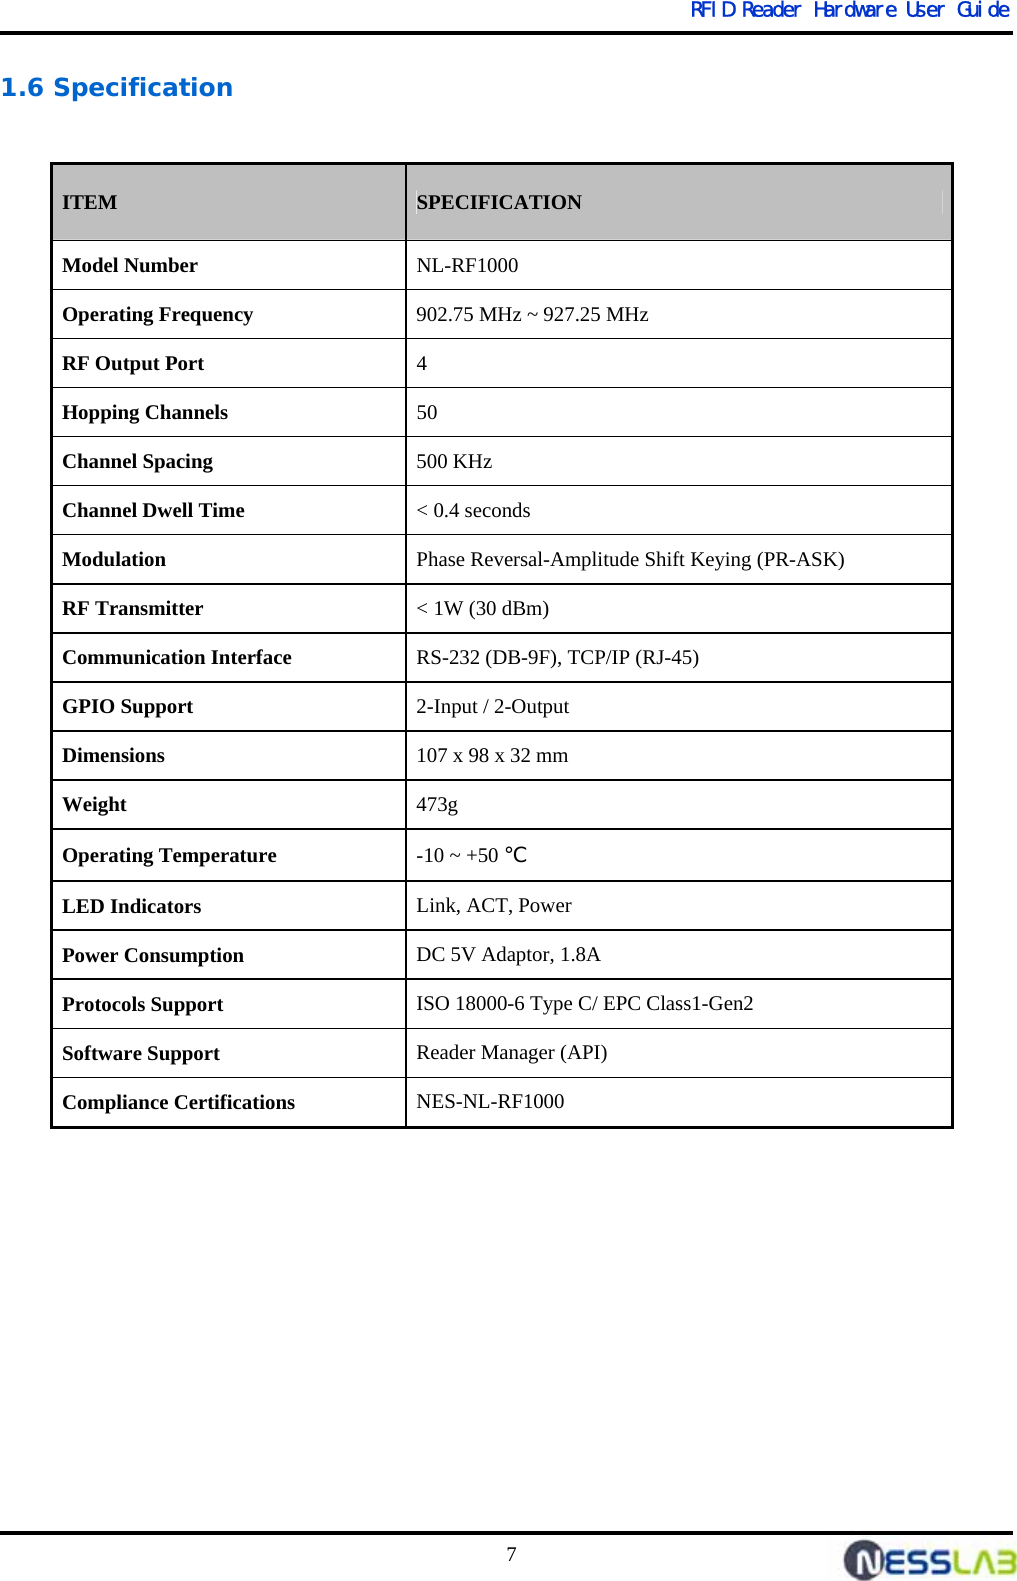   RFID Reader Hardware User Guide 7 1.6 Specification                  ITEM SPECIFICATION Model Number NL-RF1000 Operating Frequency 902.75 MHz ~ 927.25 MHz RF Output Port 4  Hopping Channels 50 Channel Spacing 500 KHz Channel Dwell Time  &lt; 0.4 seconds Modulation Phase Reversal-Amplitude Shift Keying (PR-ASK) RF Transmitter &lt; 1W (30 dBm) Communication Interface RS-232 (DB-9F), TCP/IP (RJ-45) GPIO Support  2-Input / 2-Output  Dimensions 107 x 98 x 32 mm Weight 473g Operating Temperature  -10 ~ +50 ℃ LED Indicators Link, ACT, Power Power Consumption DC 5V Adaptor, 1.8A Protocols Support  ISO 18000-6 Type C/ EPC Class1-Gen2 Software Support  Reader Manager (API) Compliance Certifications  NES-NL-RF1000 